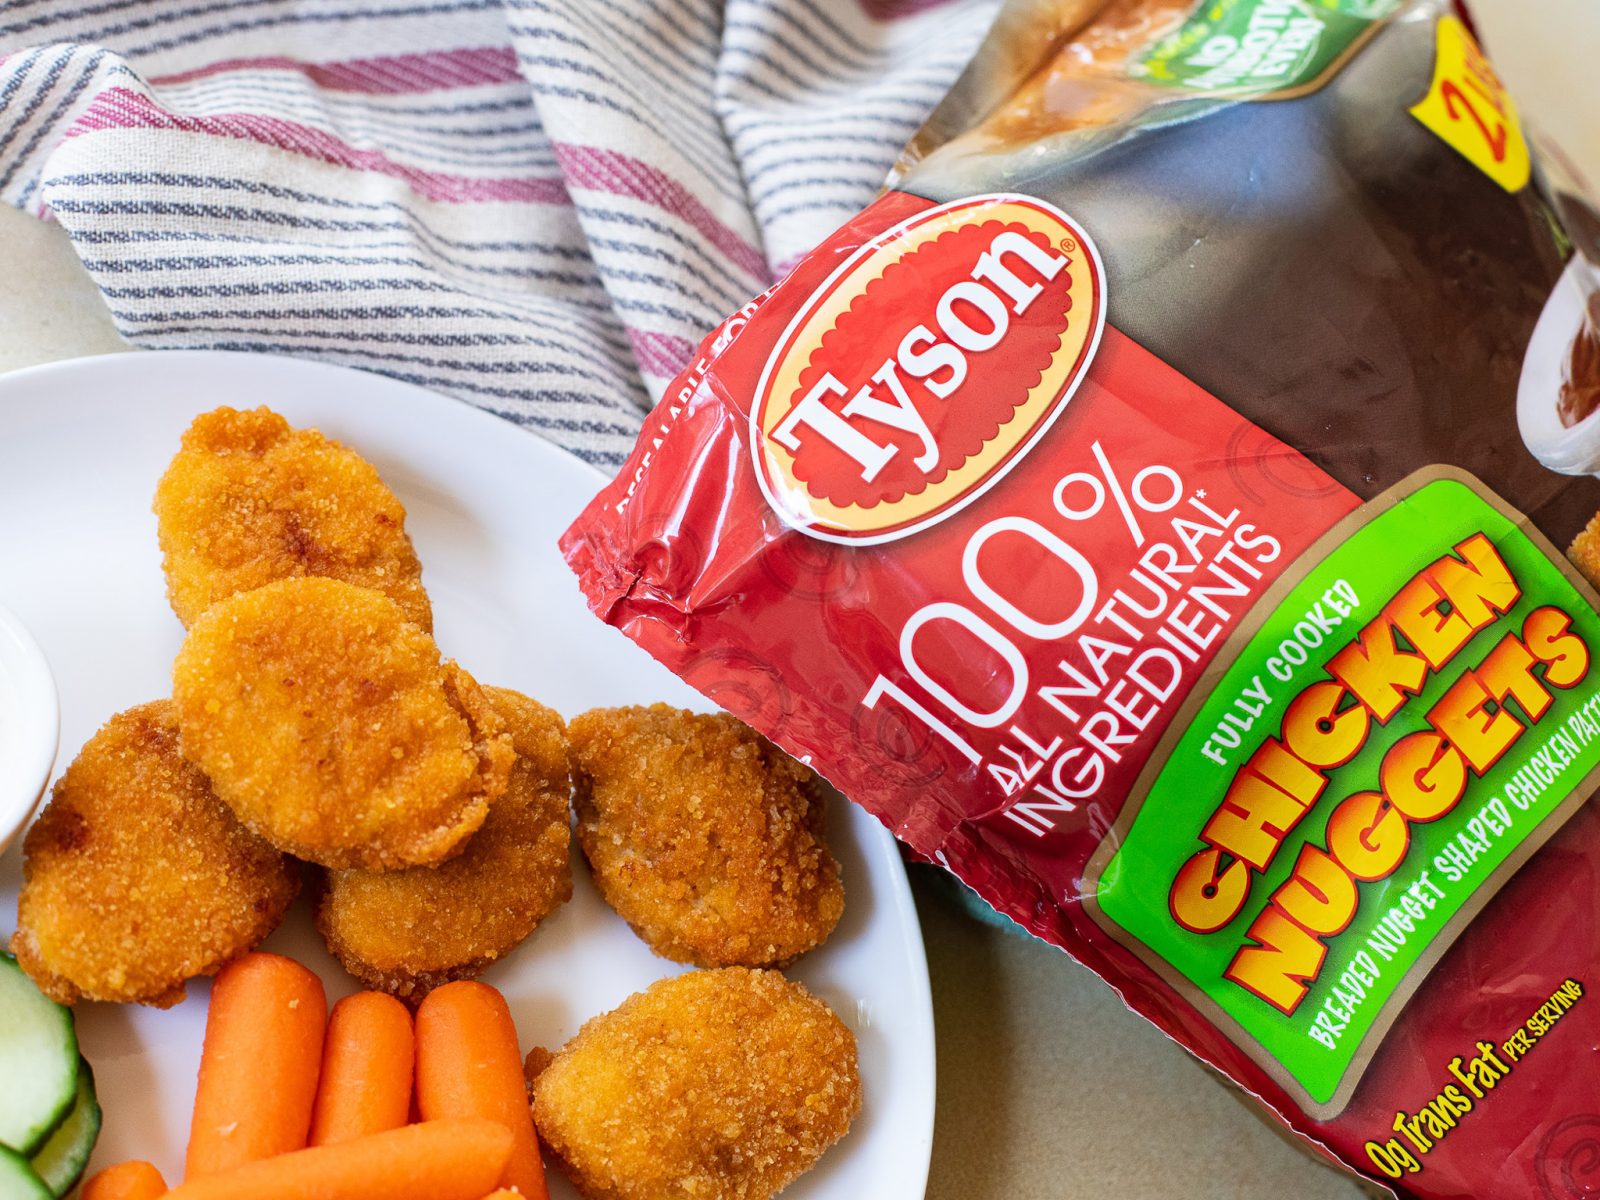 Tyson Nuggets Only $3.49 At Kroger (Regular Price $7.99)